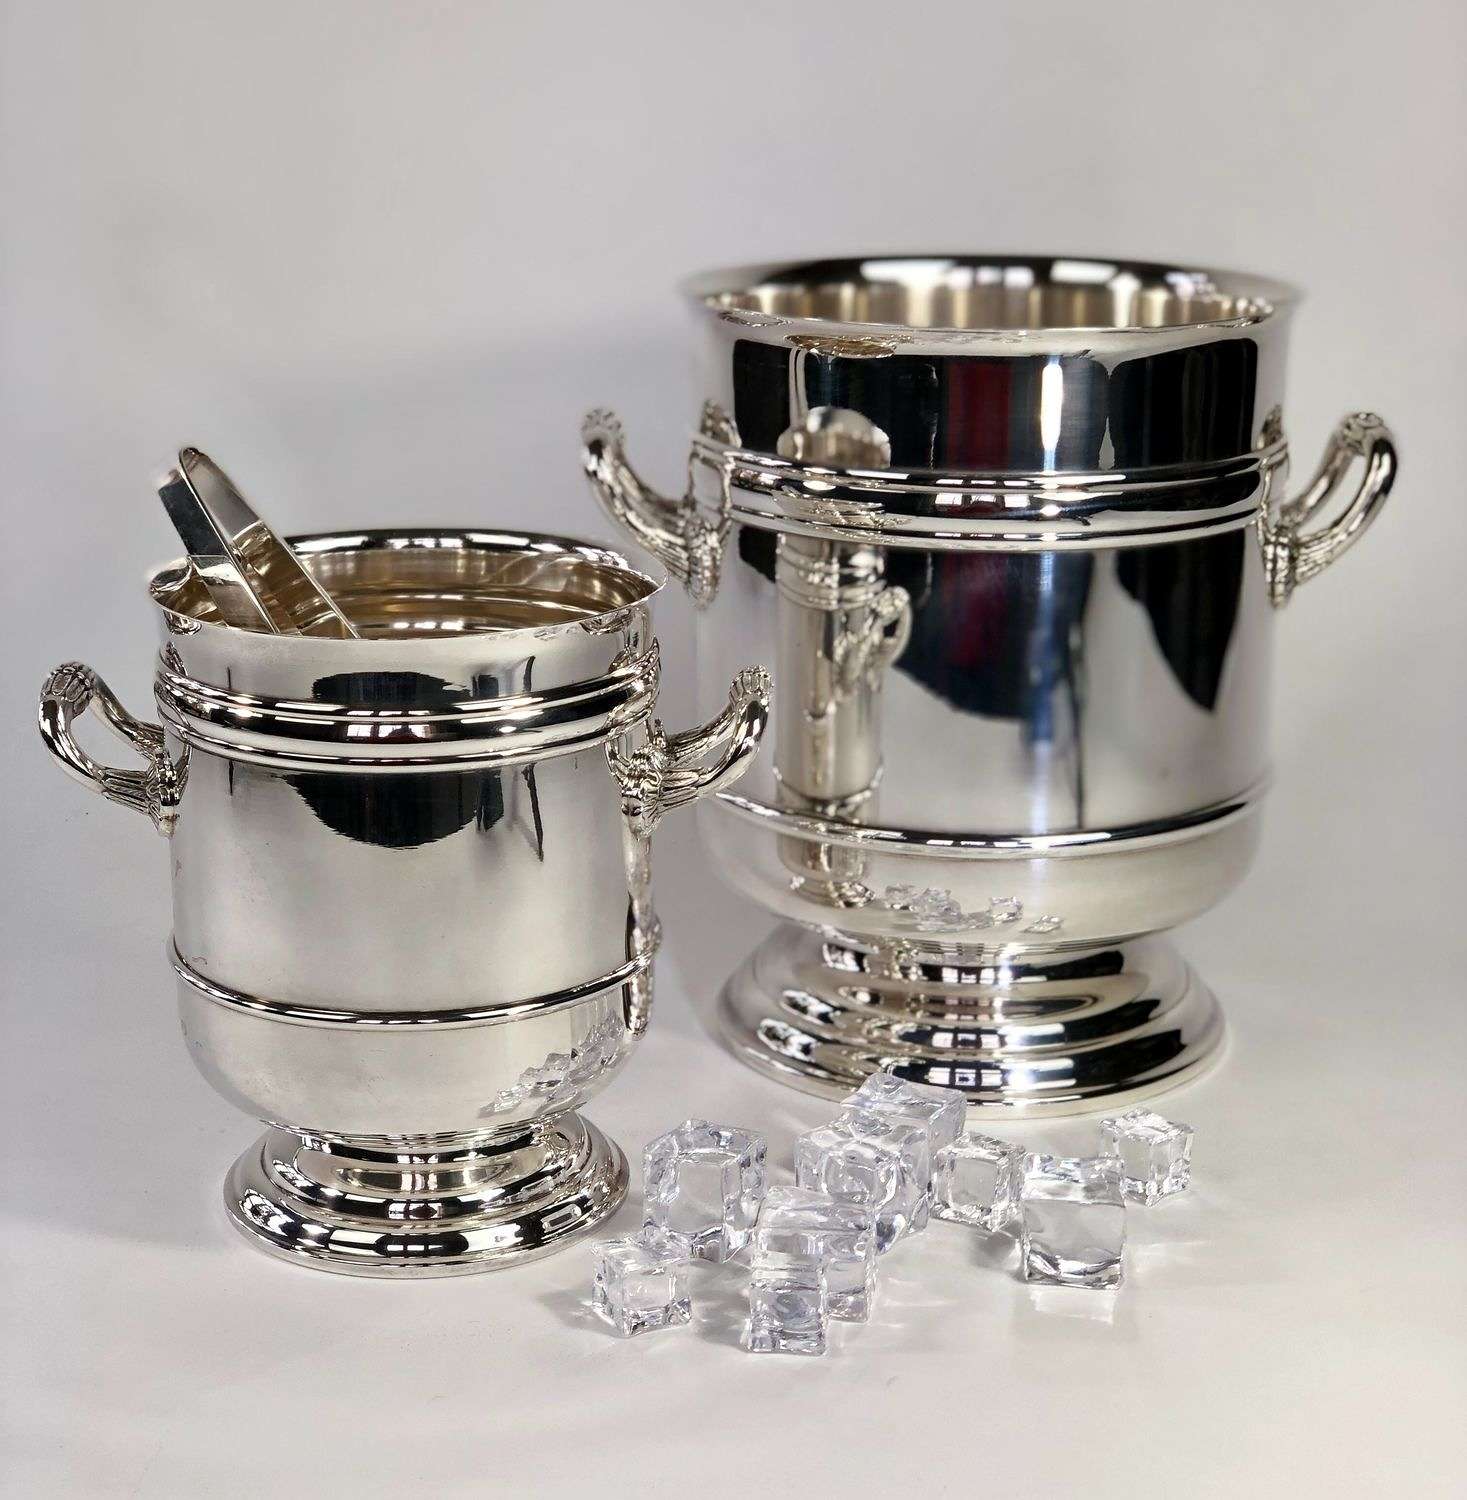 Christofle silver plated ice bucket and matching wine cooler